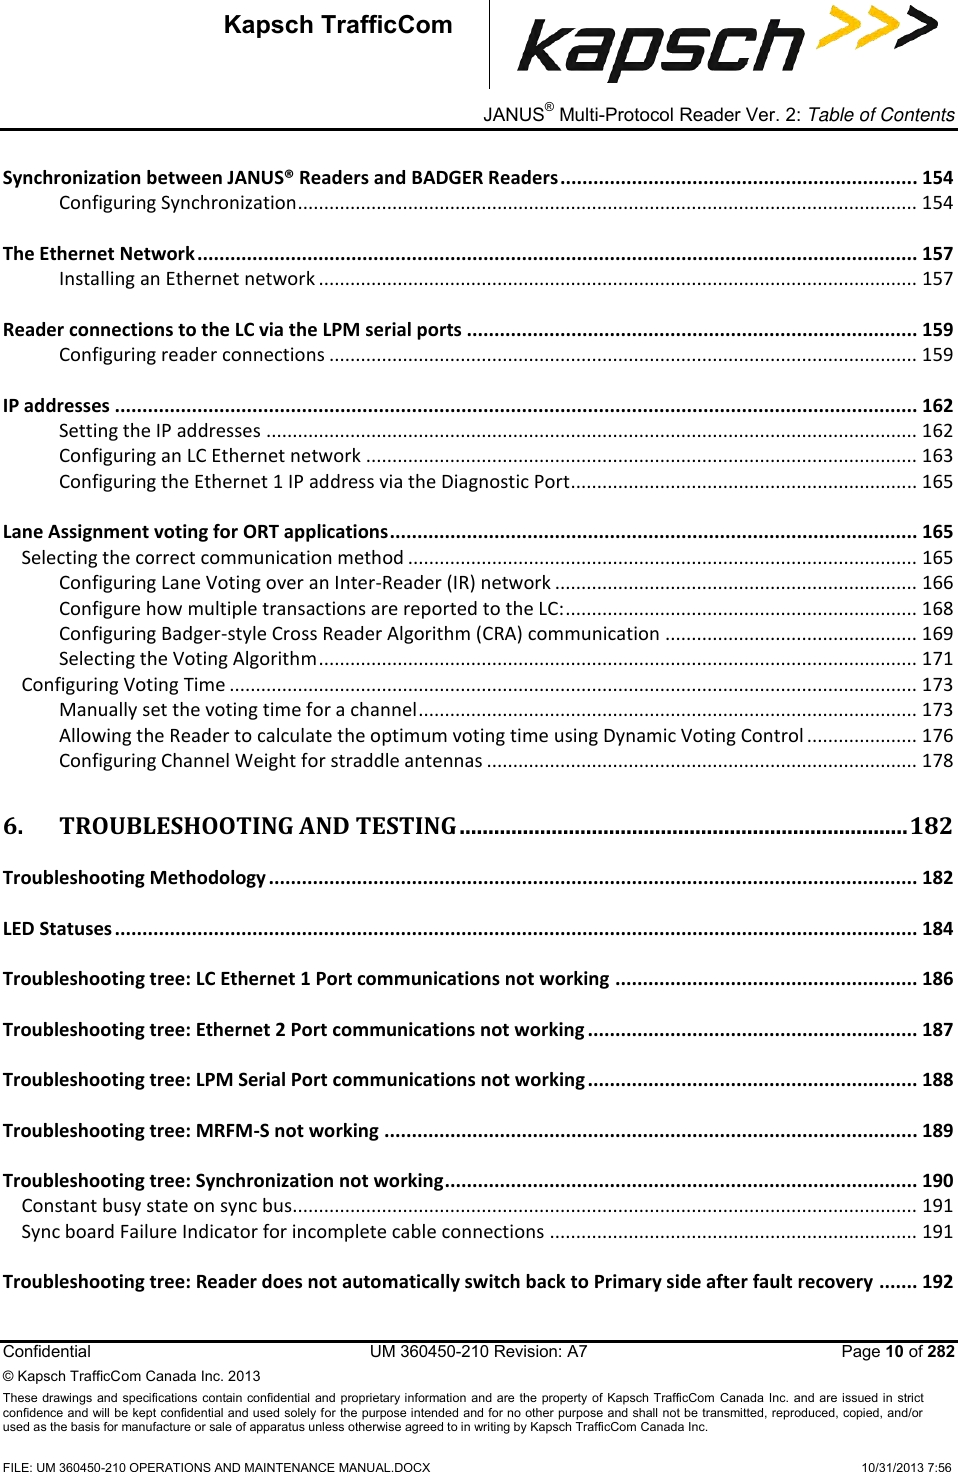 _ JANUS® Multi-Protocol Reader Ver. 2: Table of Contents   Confidential  UM 360450-210 Revision: A7   Page 10 of 282 © Kapsch TrafficCom Canada Inc. 2013 These  drawings and specifications contain confidential  and  proprietary information and are  the  property of Kapsch TrafficCom  Canada Inc.  and are issued in strict confidence and will be kept confidential and used solely for the purpose intended and for no other purpose and shall not be transmitted, reproduced, copied, and/or used as the basis for manufacture or sale of apparatus unless otherwise agreed to in writing by Kapsch TrafficCom Canada Inc.  FILE: UM 360450-210 OPERATIONS AND MAINTENANCE MANUAL.DOCX    10/31/2013 7:56  Kapsch TrafficCom Synchronization between JANUS® Readers and BADGER Readers ................................................................. 154 Configuring Synchronization ...................................................................................................................... 154 The Ethernet Network ................................................................................................................................... 157 Installing an Ethernet network .................................................................................................................. 157 Reader connections to the LC via the LPM serial ports .................................................................................. 159 Configuring reader connections ................................................................................................................ 159 IP addresses .................................................................................................................................................. 162 Setting the IP addresses ............................................................................................................................ 162 Configuring an LC Ethernet network ......................................................................................................... 163 Configuring the Ethernet 1 IP address via the Diagnostic Port.................................................................. 165 Lane Assignment voting for ORT applications ................................................................................................ 165 Selecting the correct communication method ................................................................................................. 165 Configuring Lane Voting over an Inter-Reader (IR) network ..................................................................... 166 Configure how multiple transactions are reported to the LC: ................................................................... 168 Configuring Badger-style Cross Reader Algorithm (CRA) communication ................................................ 169 Selecting the Voting Algorithm .................................................................................................................. 171 Configuring Voting Time ................................................................................................................................... 173 Manually set the voting time for a channel ............................................................................................... 173 Allowing the Reader to calculate the optimum voting time using Dynamic Voting Control ..................... 176 Configuring Channel Weight for straddle antennas .................................................................................. 178 6. TROUBLESHOOTING AND TESTING .............................................................................. 182 Troubleshooting Methodology ...................................................................................................................... 182 LED Statuses .................................................................................................................................................. 184 Troubleshooting tree: LC Ethernet 1 Port communications not working ....................................................... 186 Troubleshooting tree: Ethernet 2 Port communications not working ............................................................ 187 Troubleshooting tree: LPM Serial Port communications not working ............................................................ 188 Troubleshooting tree: MRFM-S not working ................................................................................................. 189 Troubleshooting tree: Synchronization not working ...................................................................................... 190 Constant busy state on sync bus....................................................................................................................... 191 Sync board Failure Indicator for incomplete cable connections ...................................................................... 191 Troubleshooting tree: Reader does not automatically switch back to Primary side after fault recovery ....... 192 